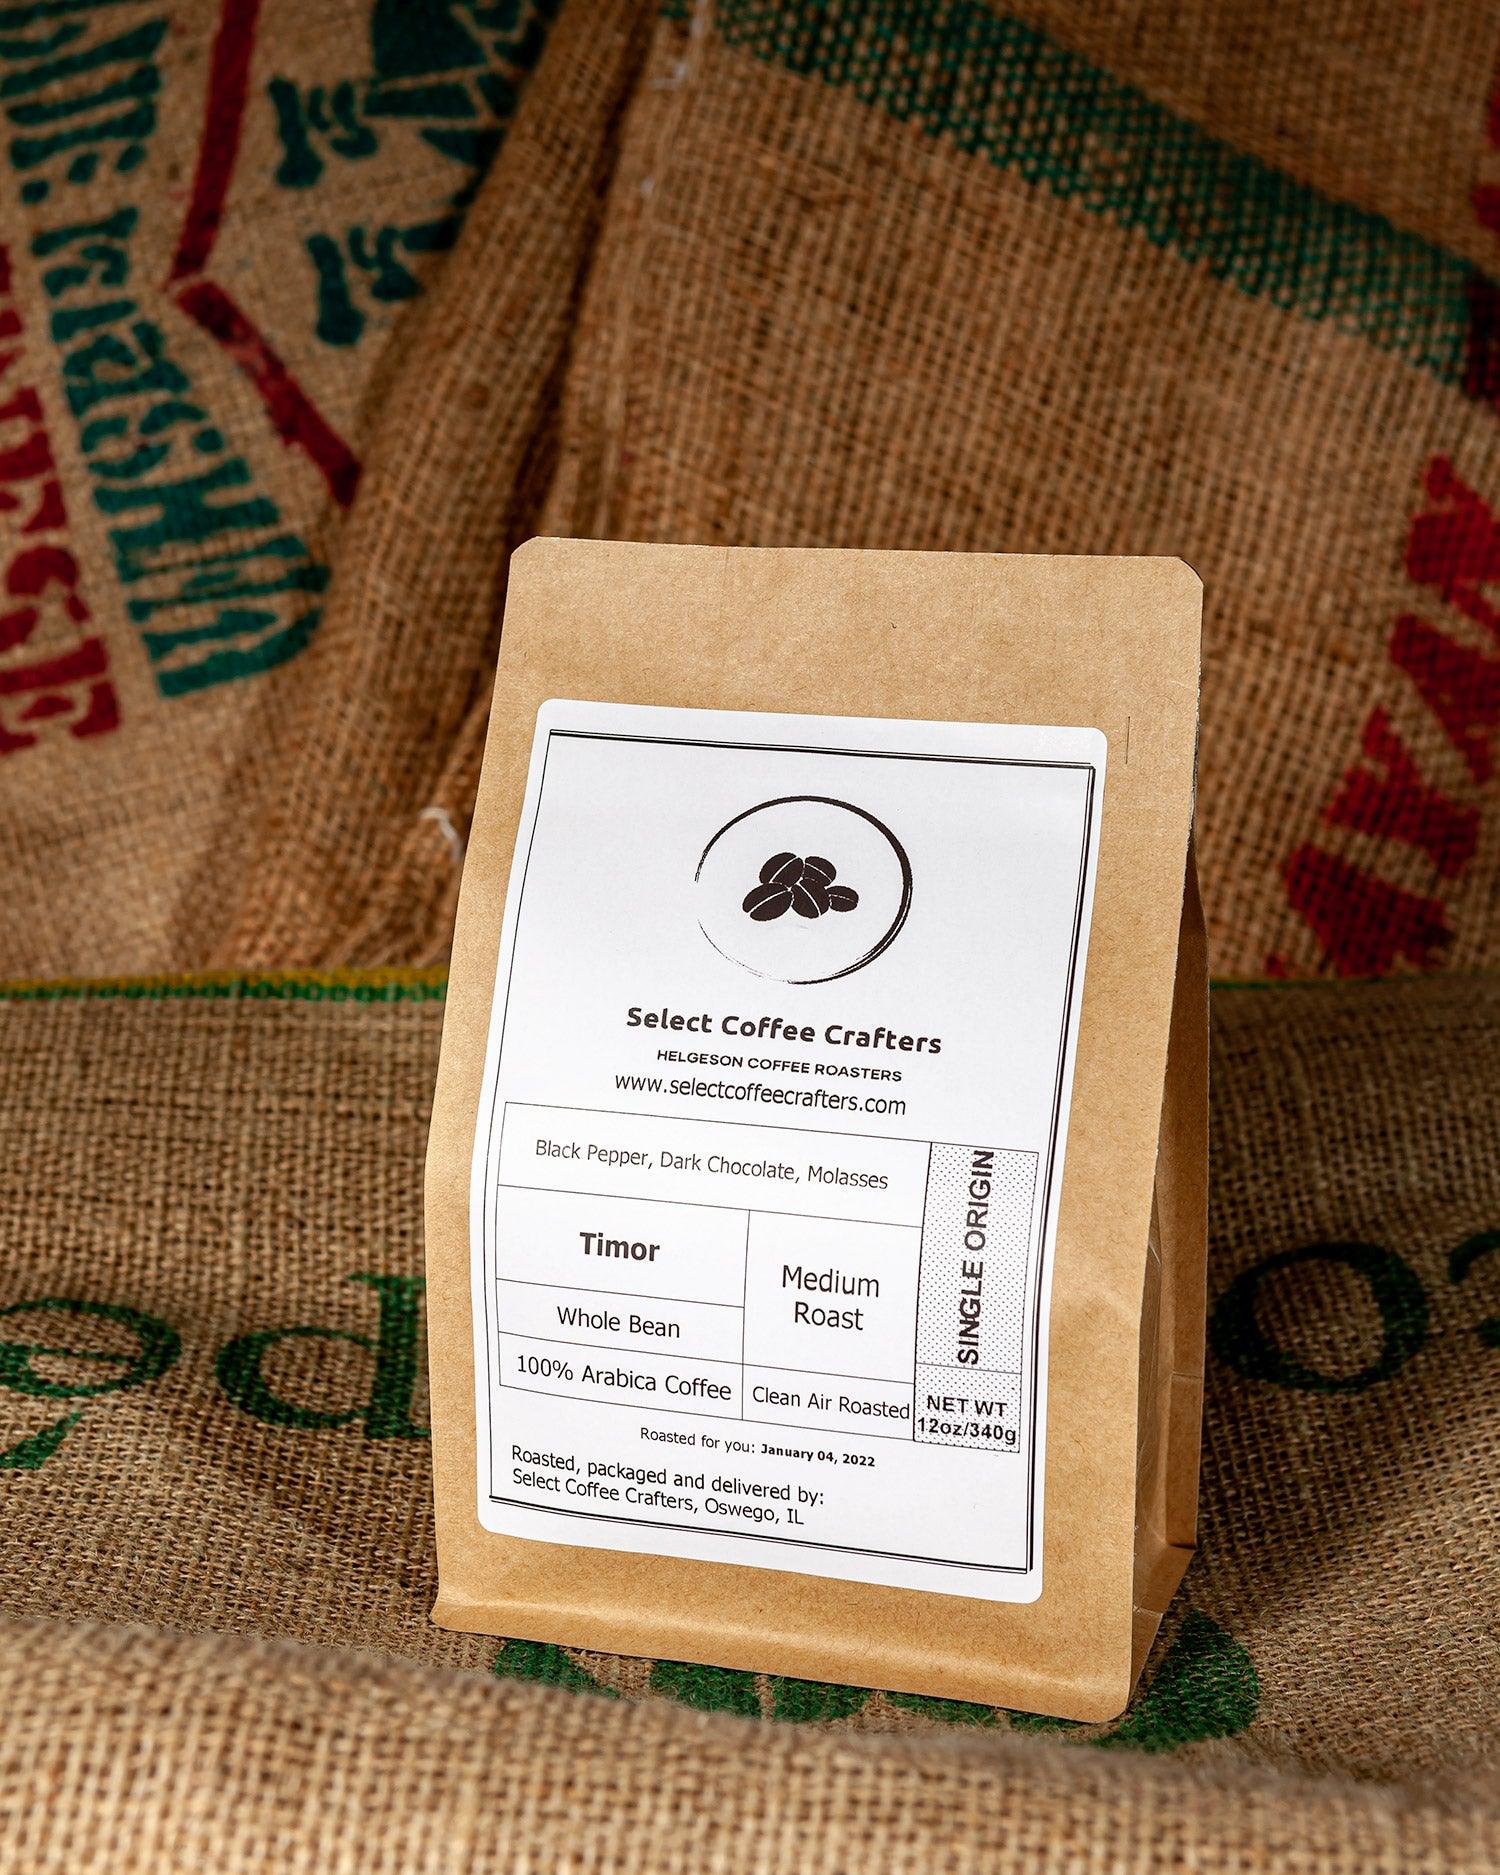 Timor - Select Coffee Crafters LLC